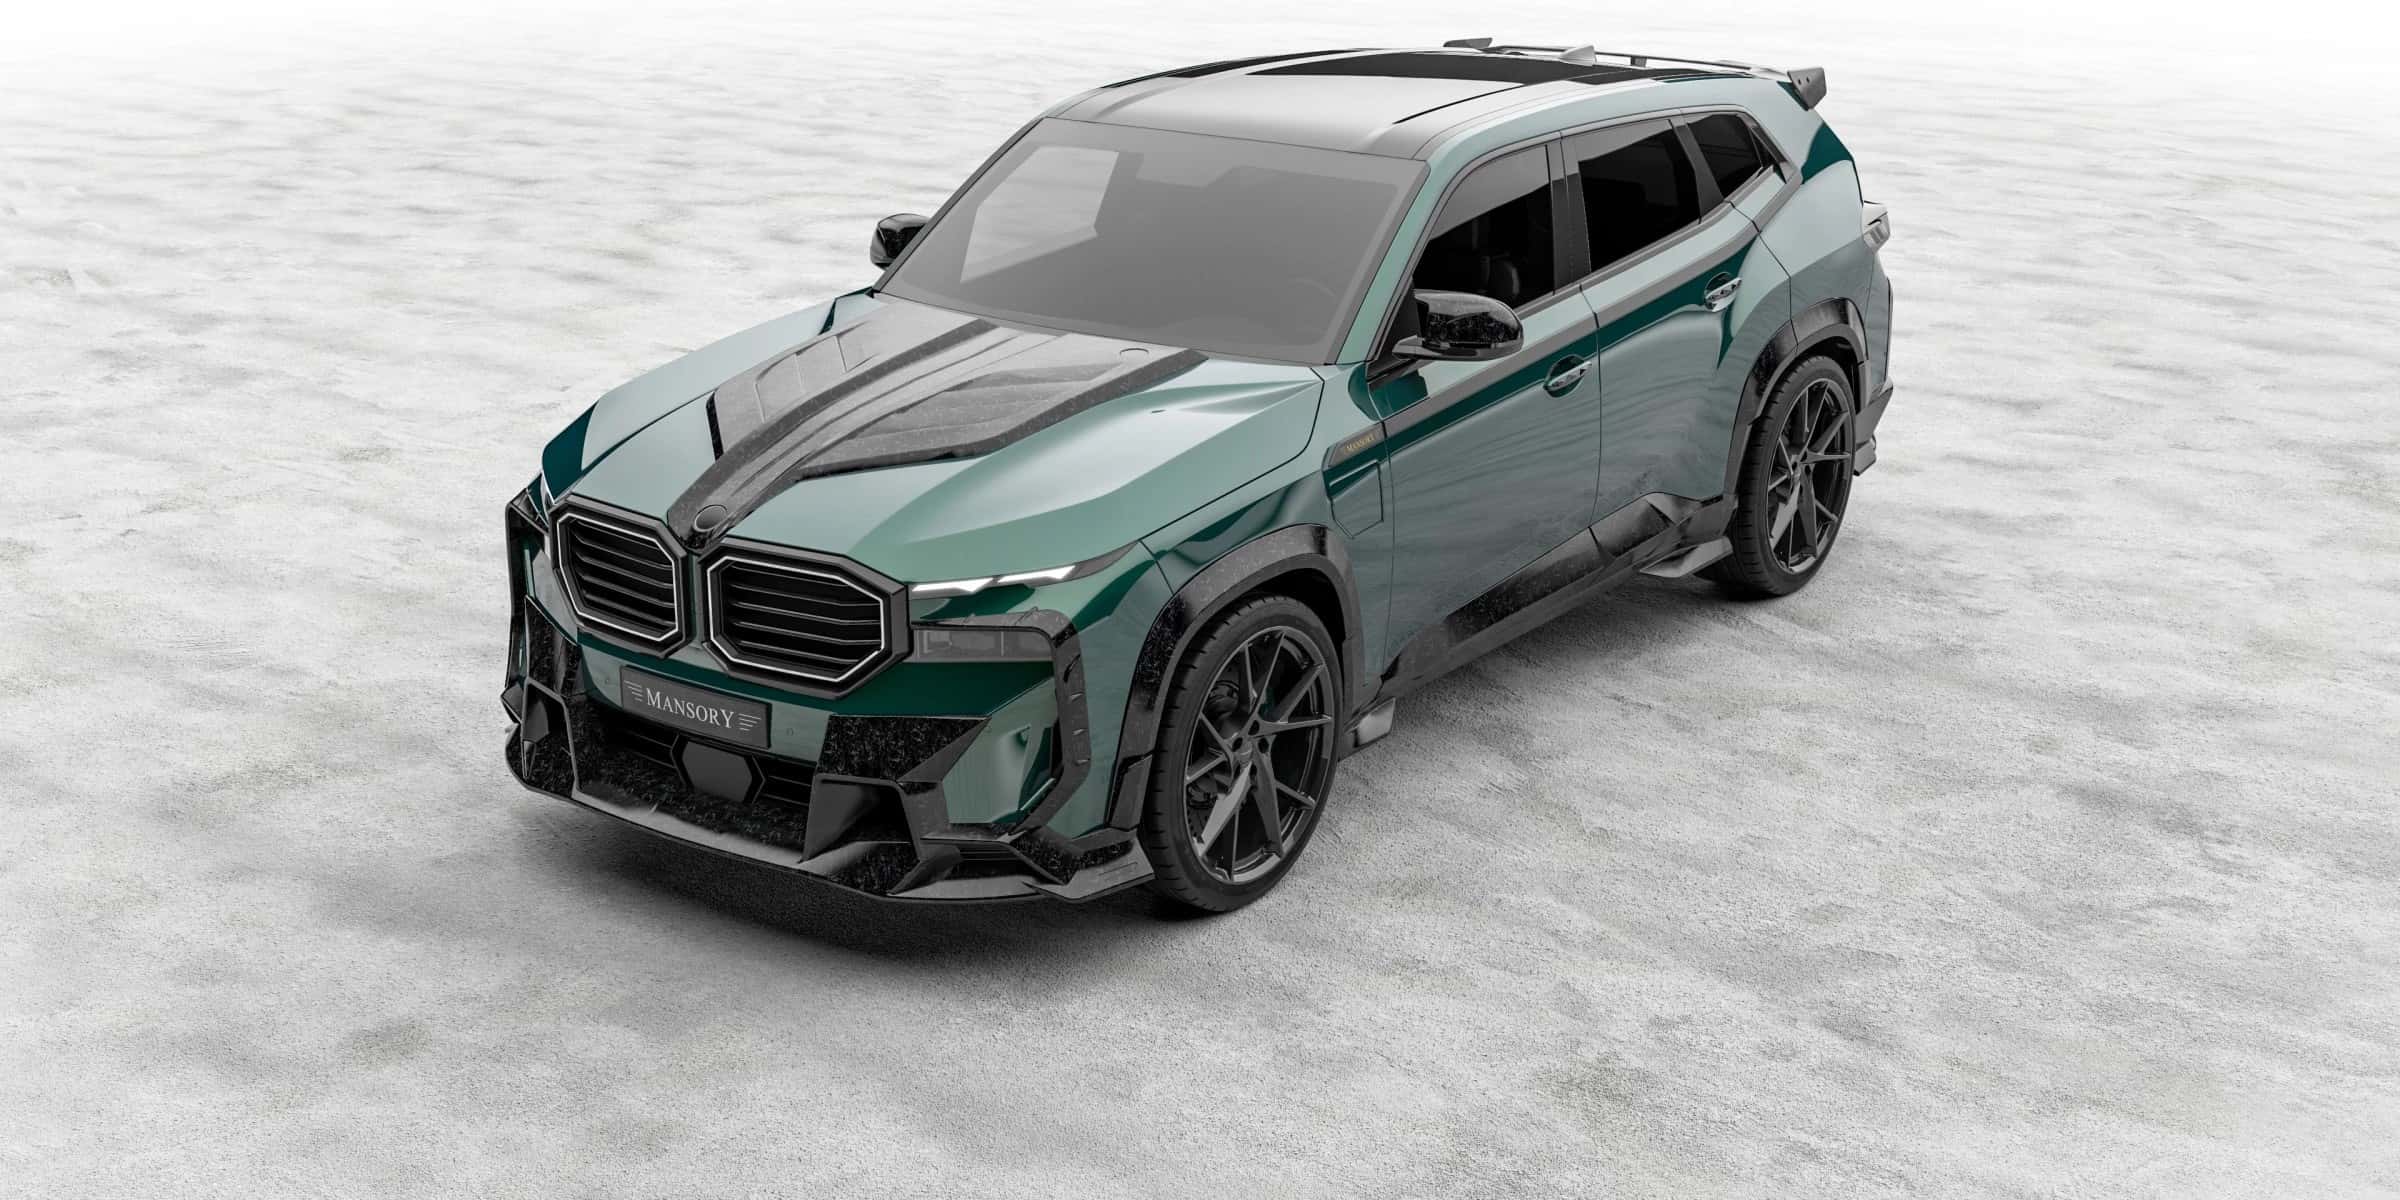 Mansory Finds A Way To Make The BMW XM Look Wilder